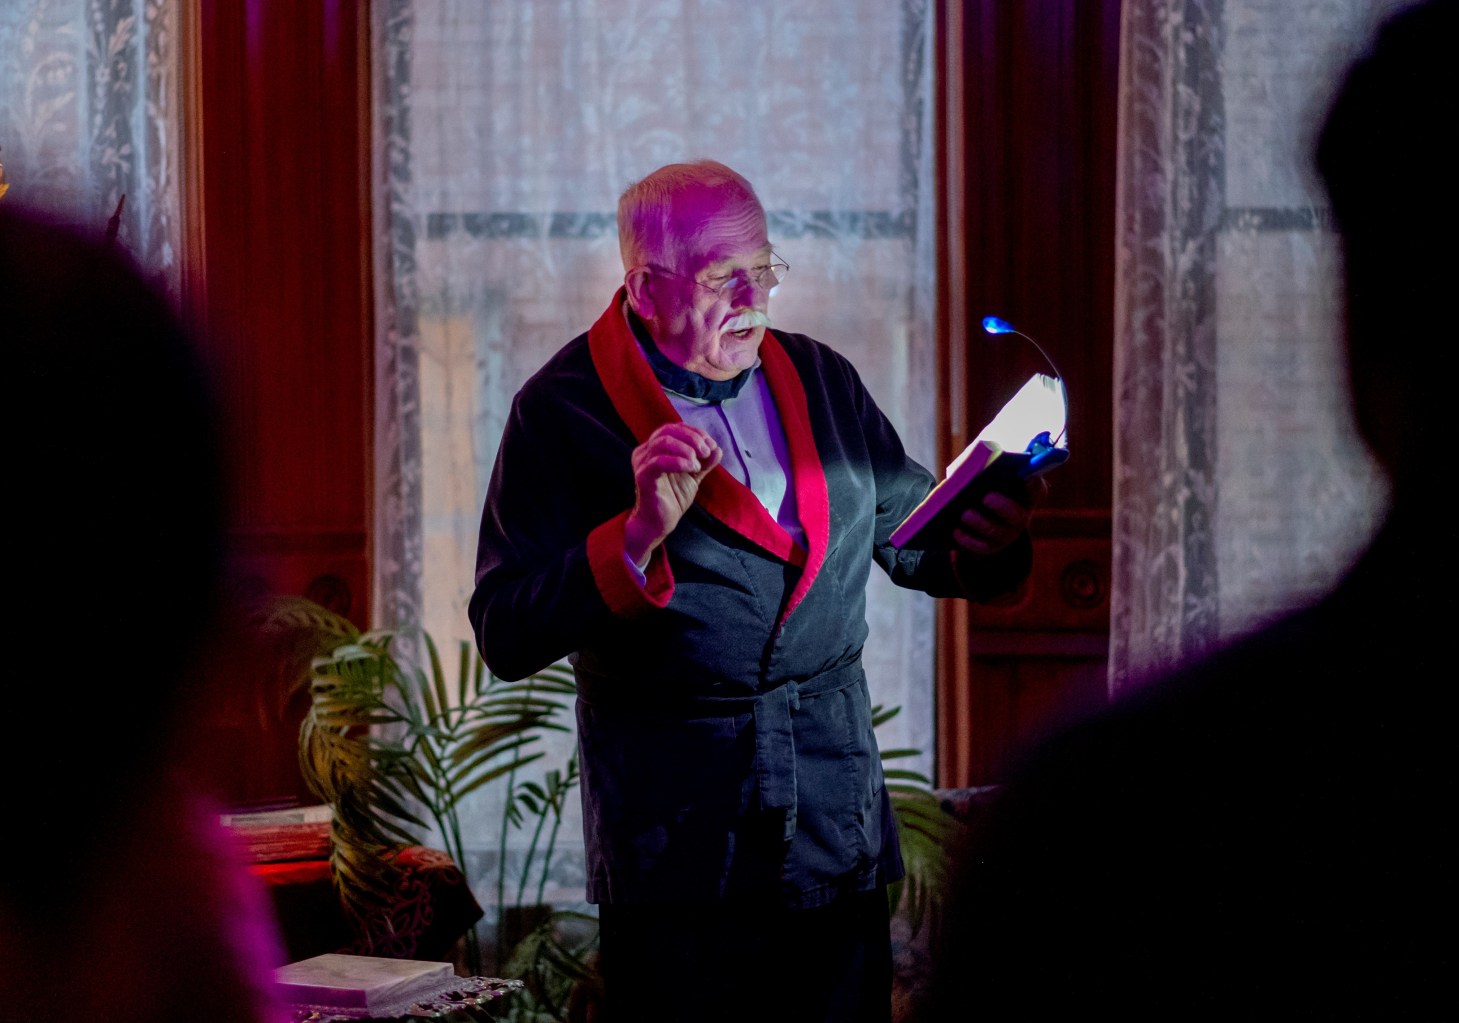 An actor stands in a dimly lit interior of the house museum holding a book, while audience members watch.